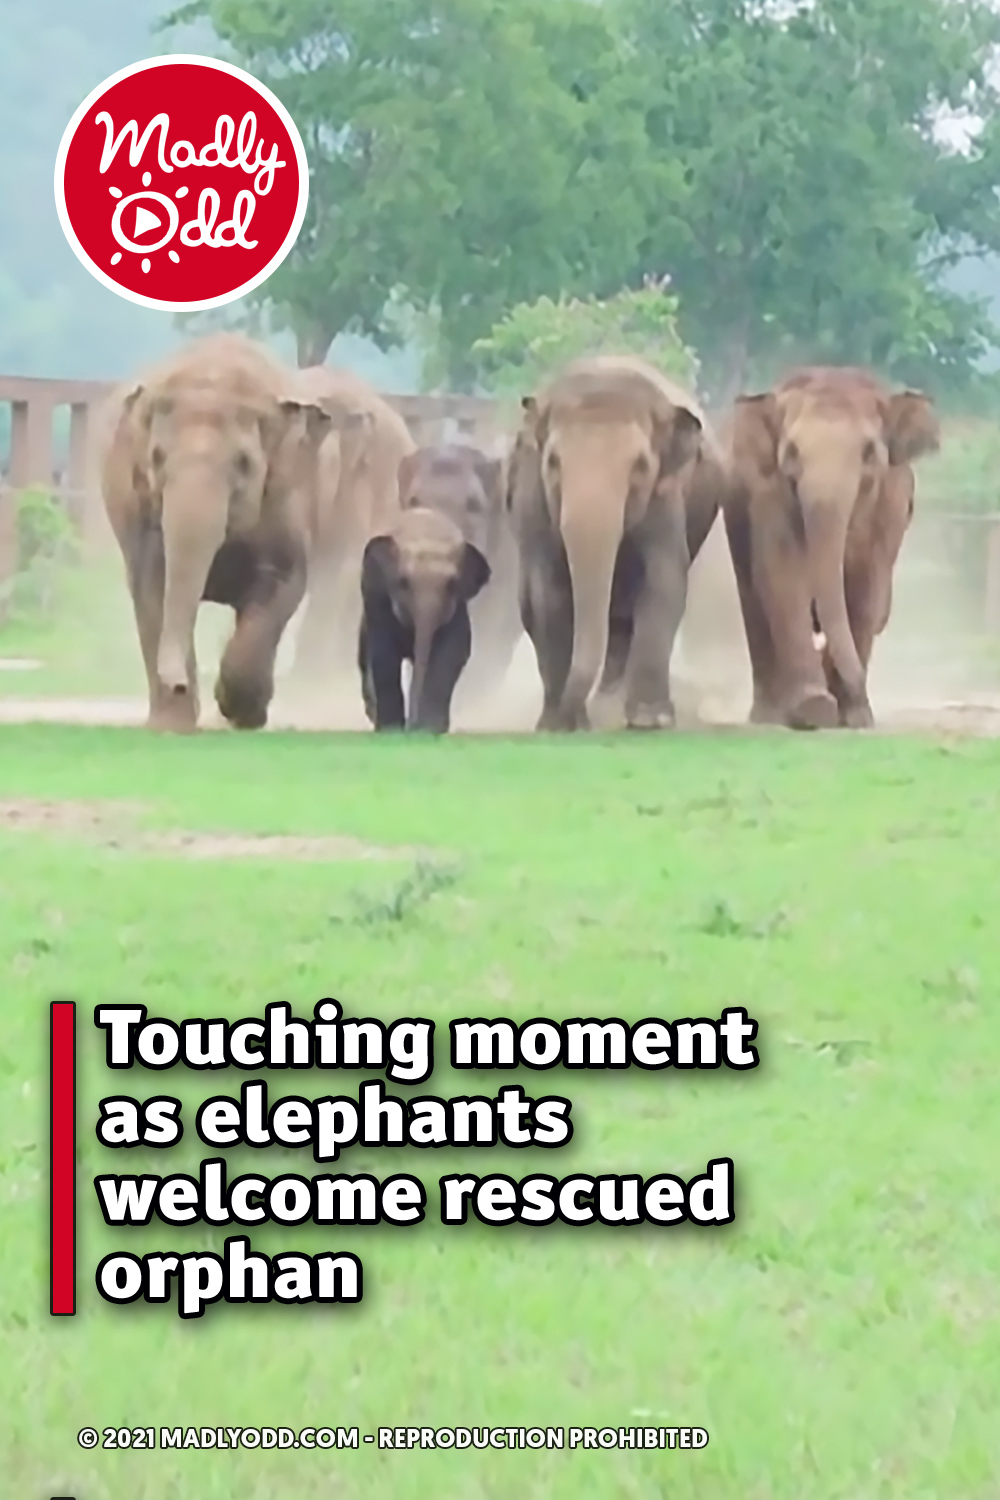 Touching moment as elephants welcome rescued orphan